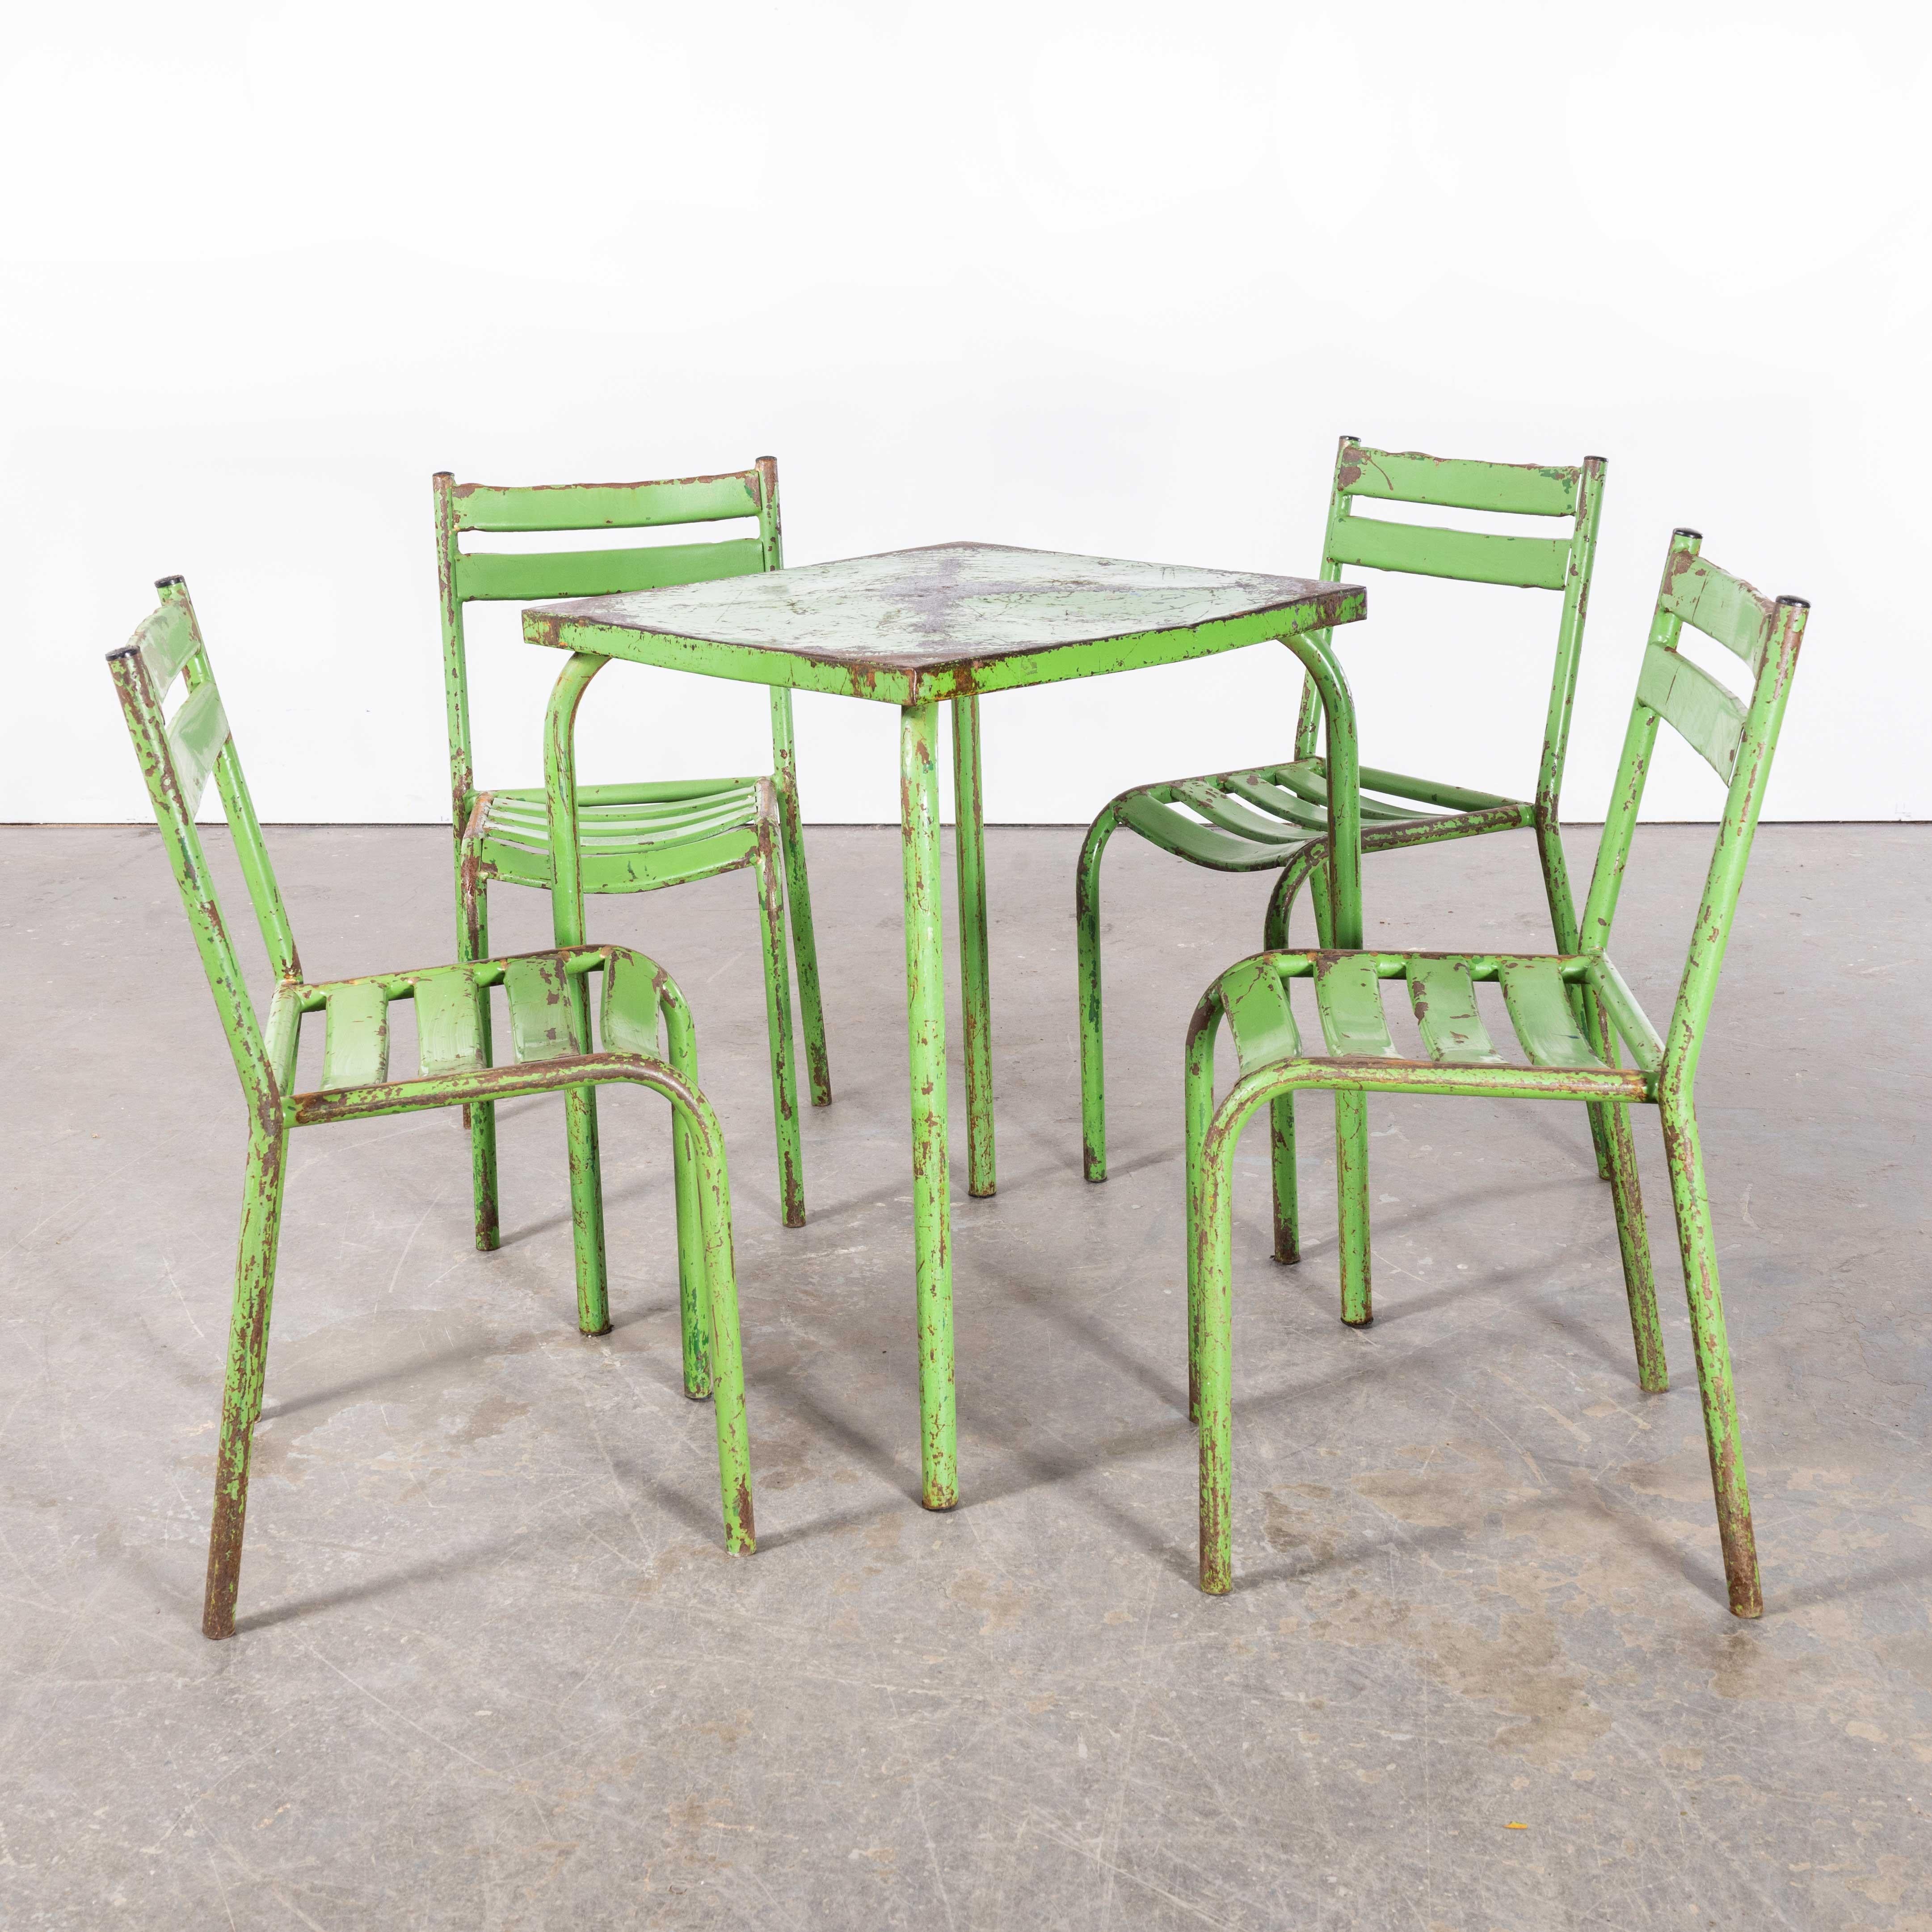 1950's Original French Outdoor Table And Chair Set - Four Chairs 5